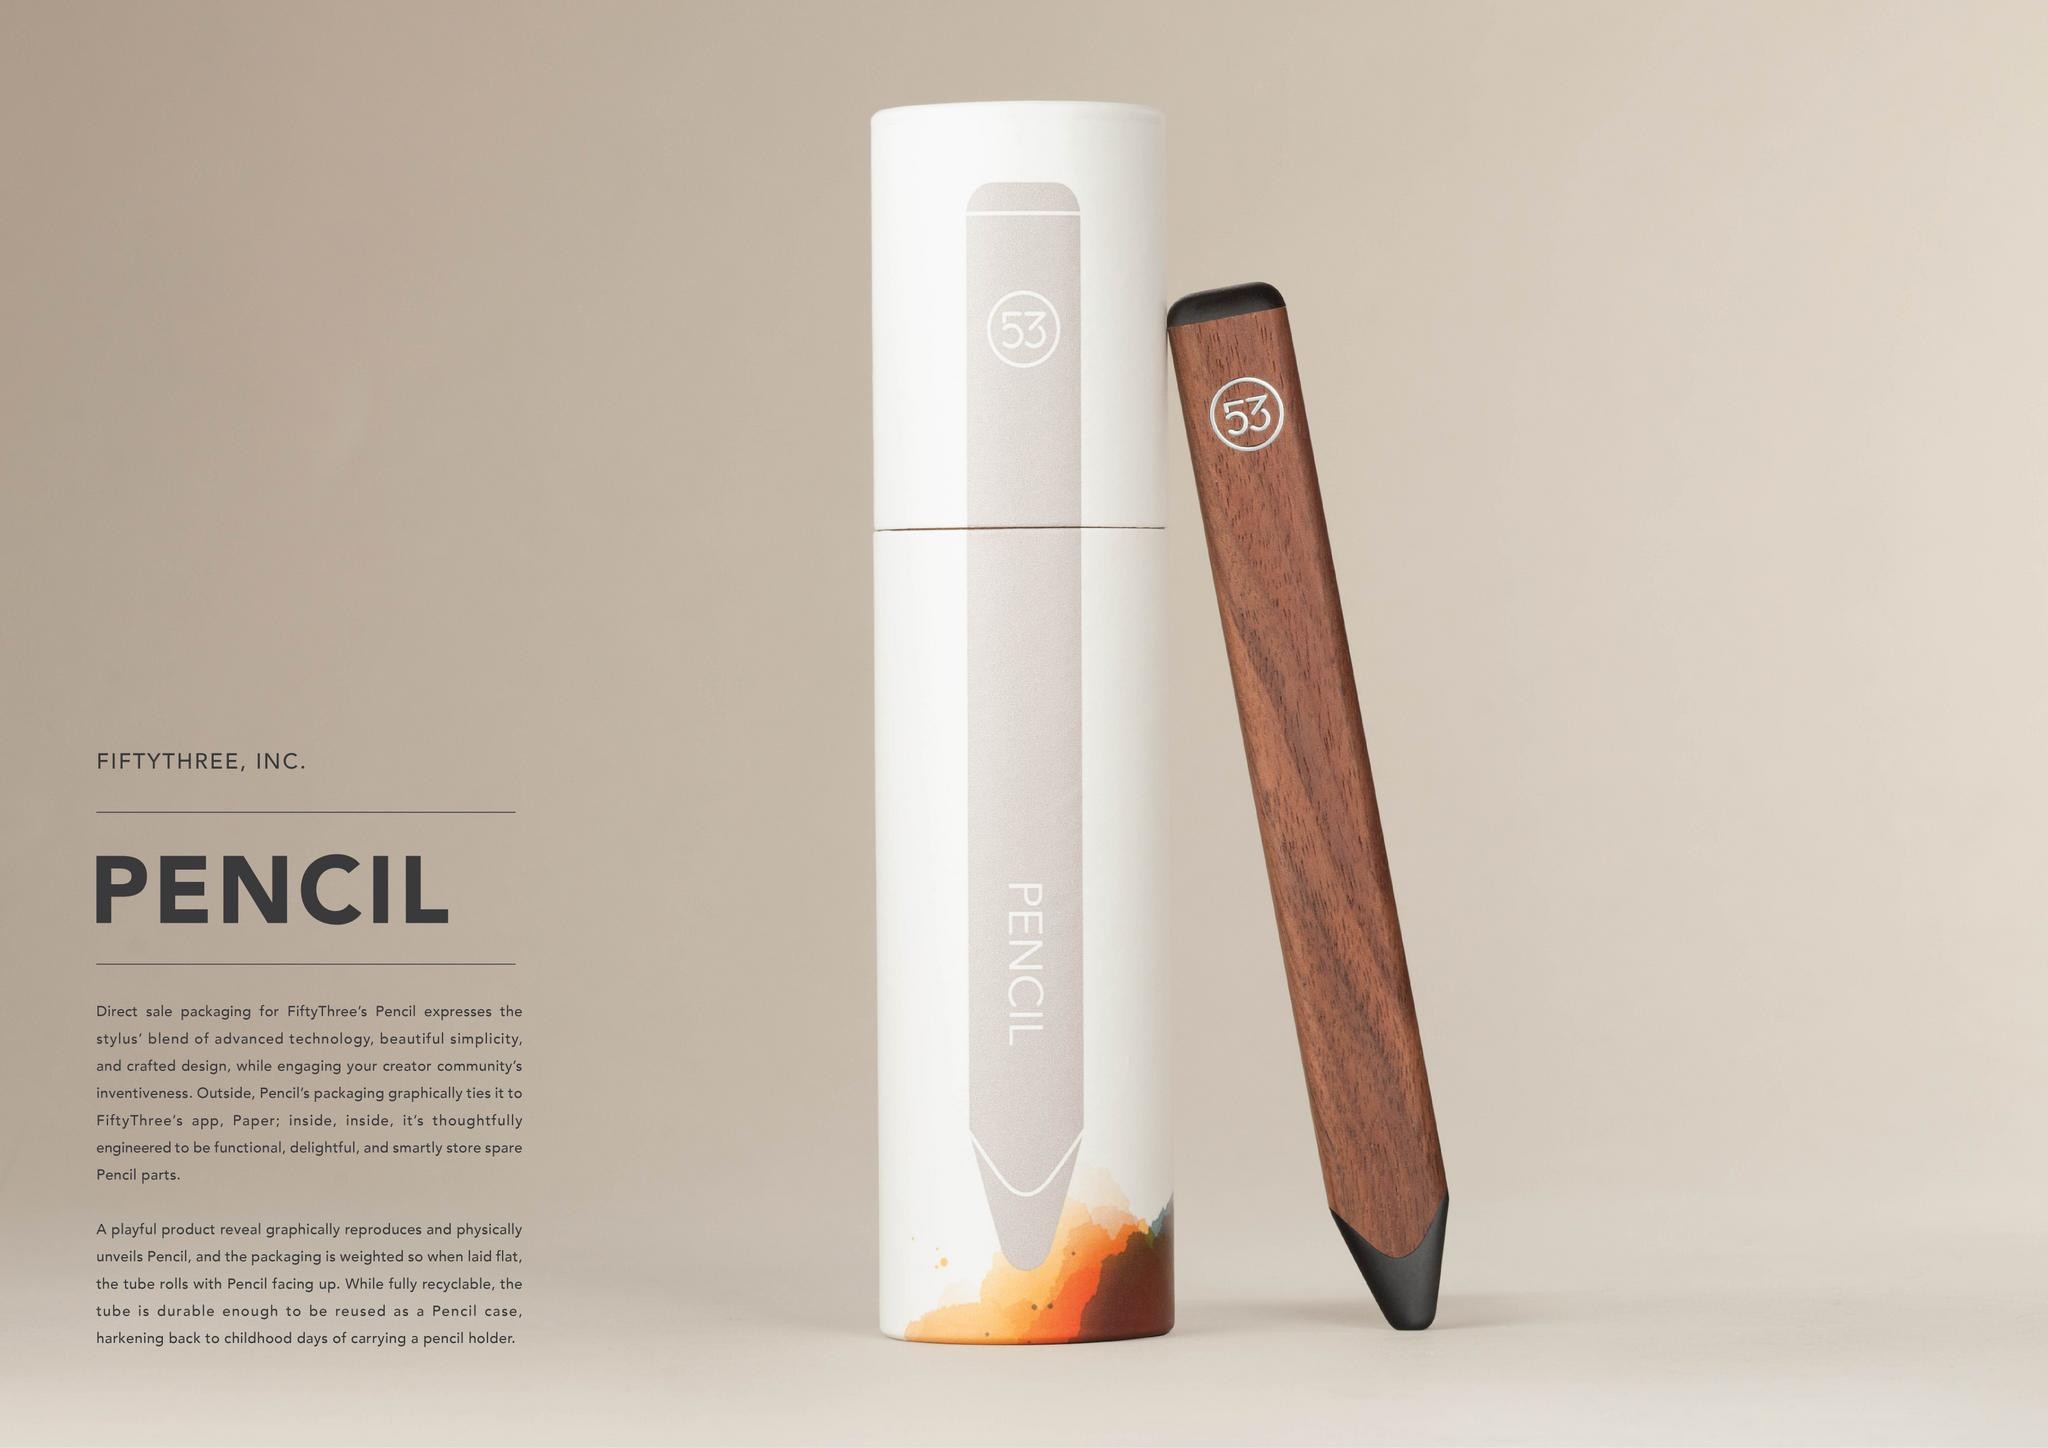 PENCIL BY FIFTYTHREE PACKAGING